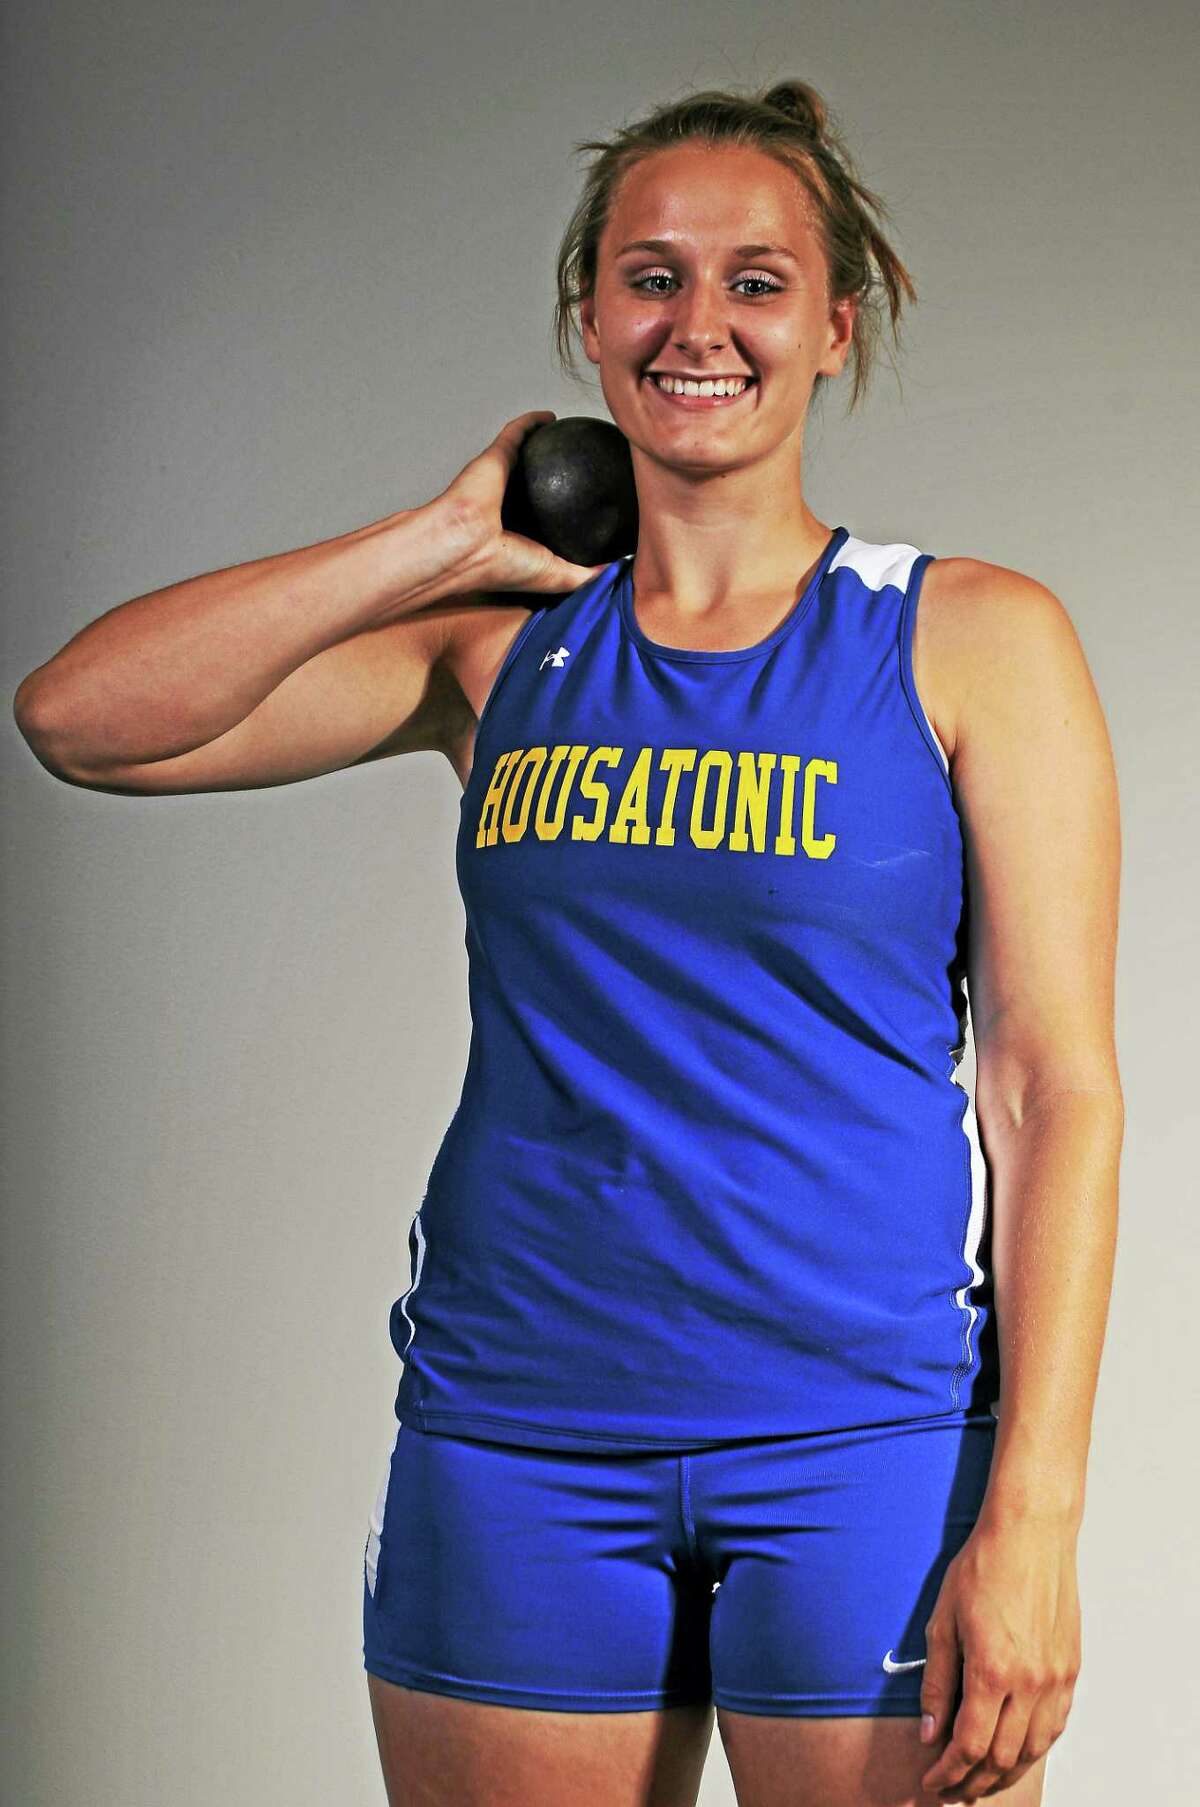 Former Housatonic track and field athlete Katie Heacox is ready to begin her first season at Southern Connecticut State University.